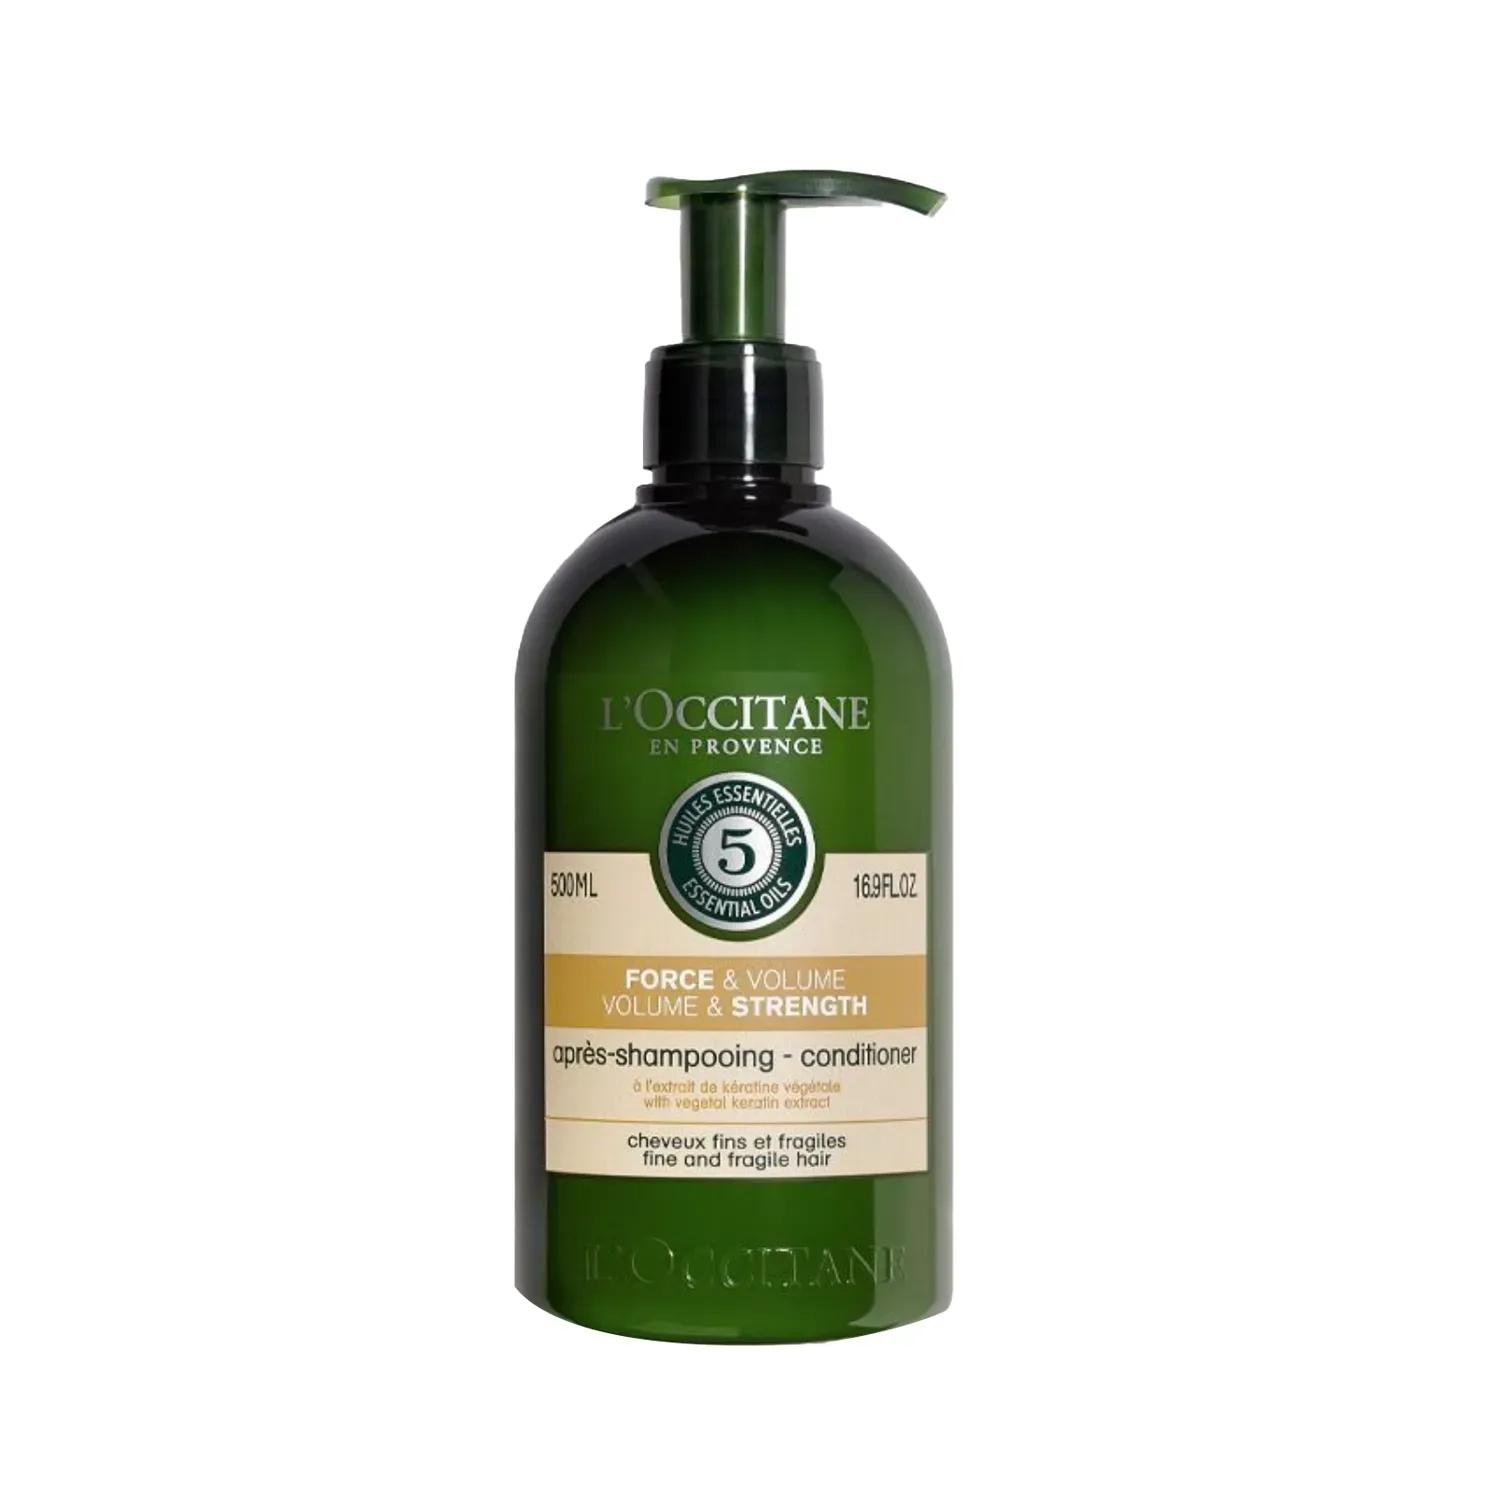 L'Occitane EN Provence Force & Volume & Strength Shampooing Conditioner (500ml)